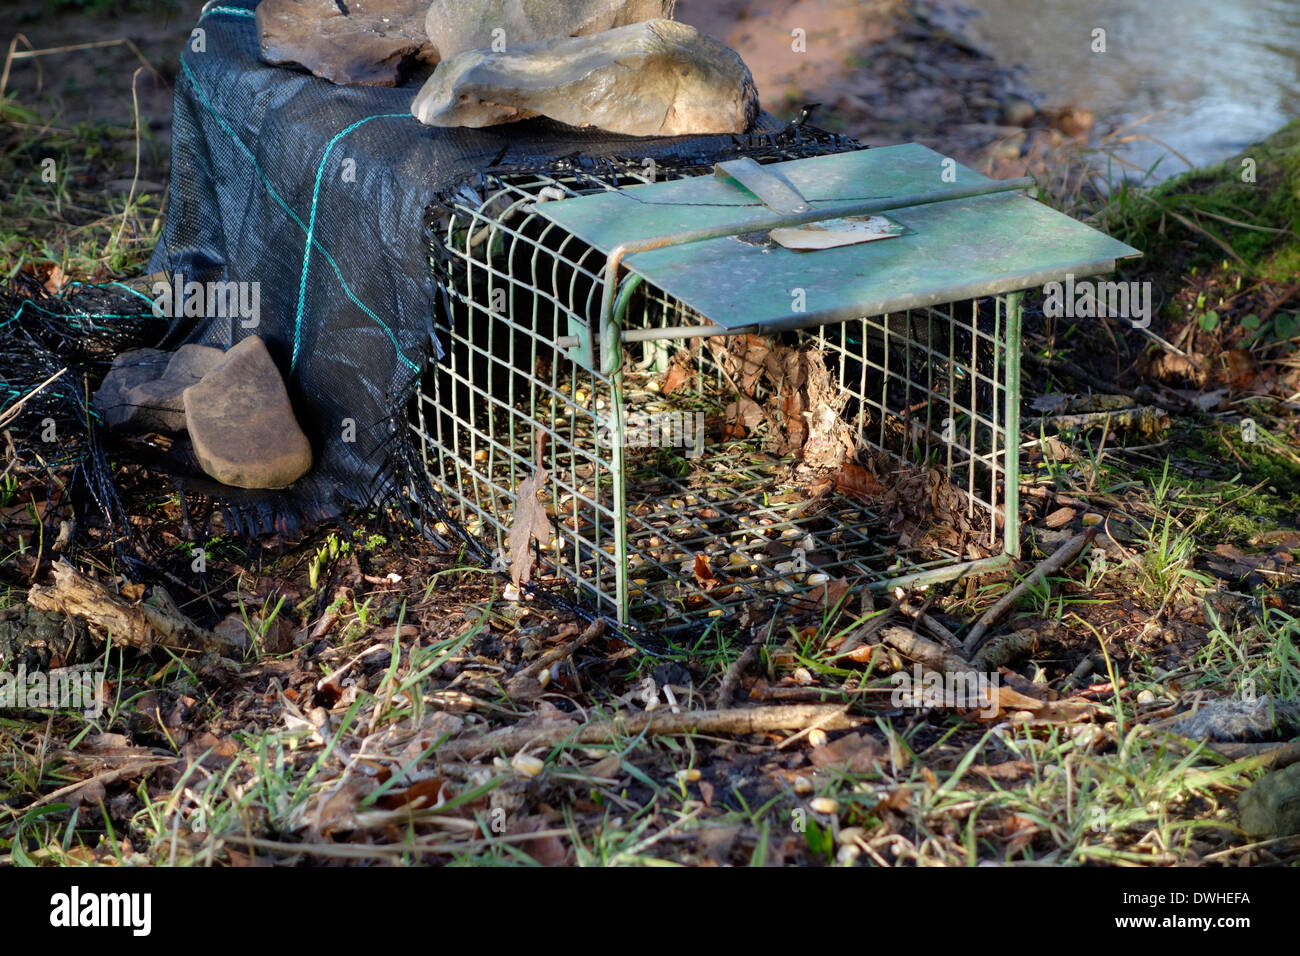 Traps baited with Maize - Corn - Zea mays seed to attract grey squirrels. Stock Photo